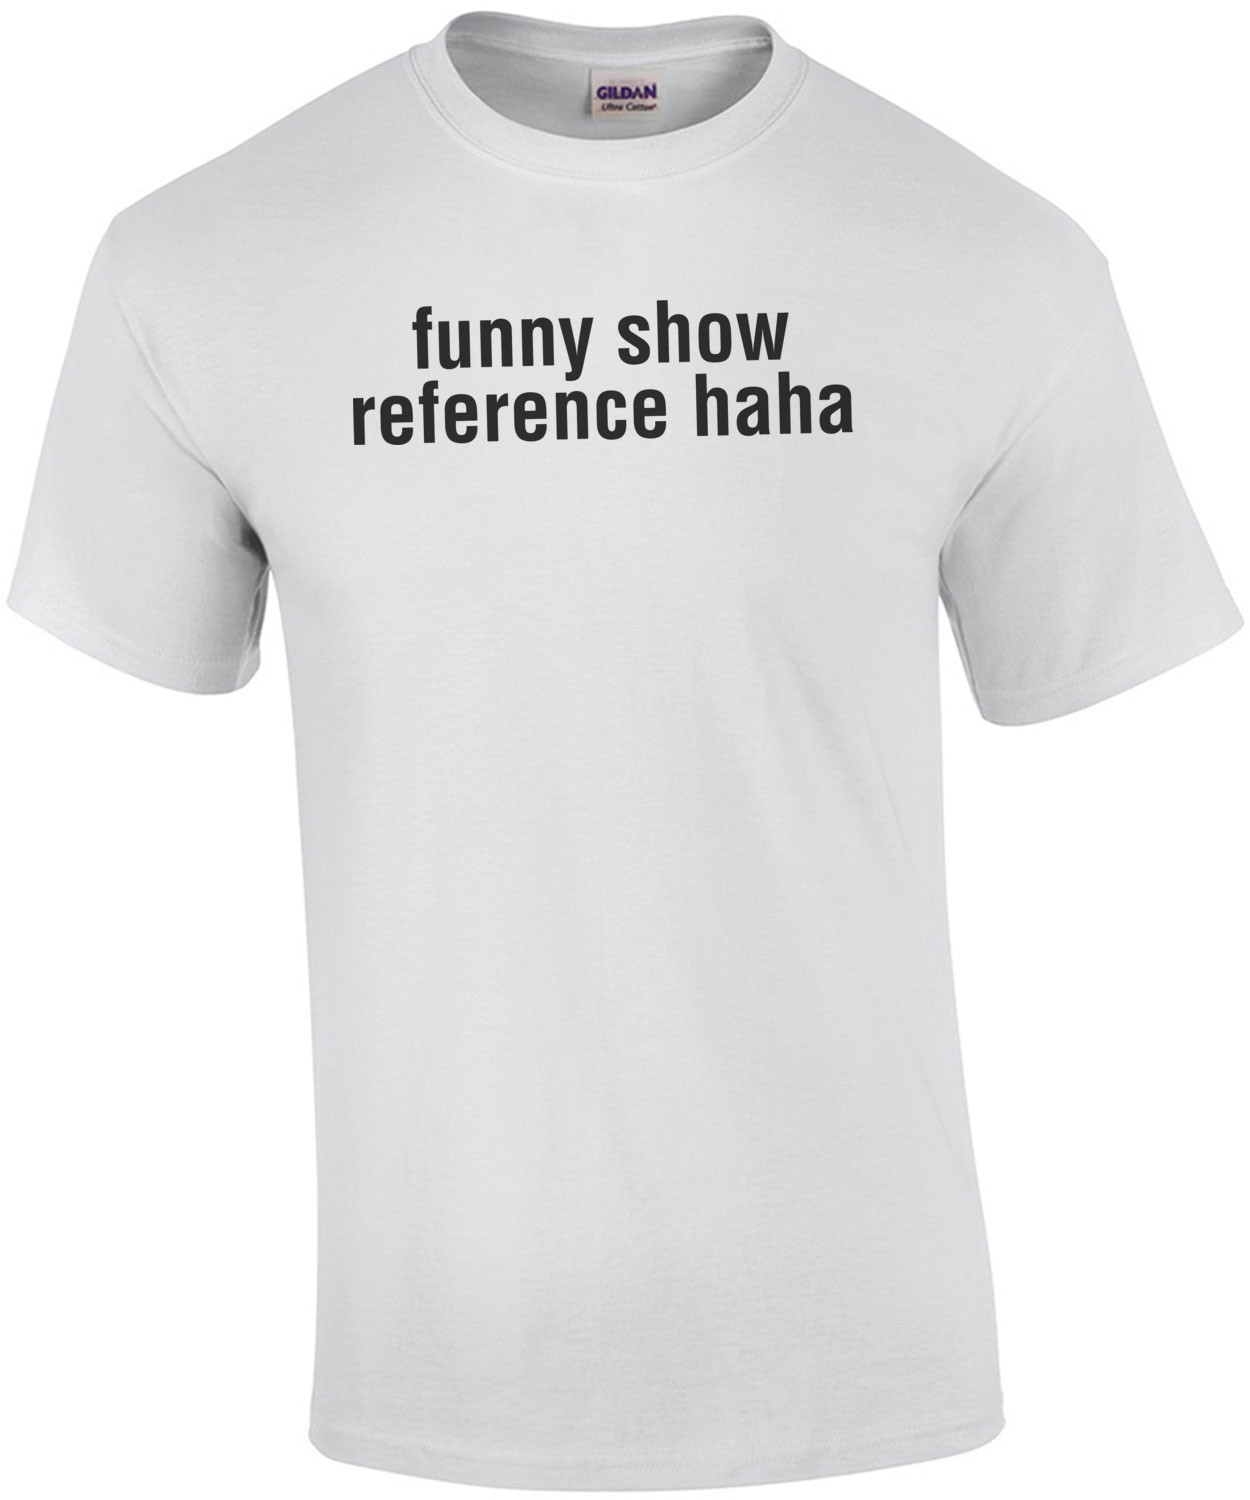 Funny Show Reference Haha T-Shirt